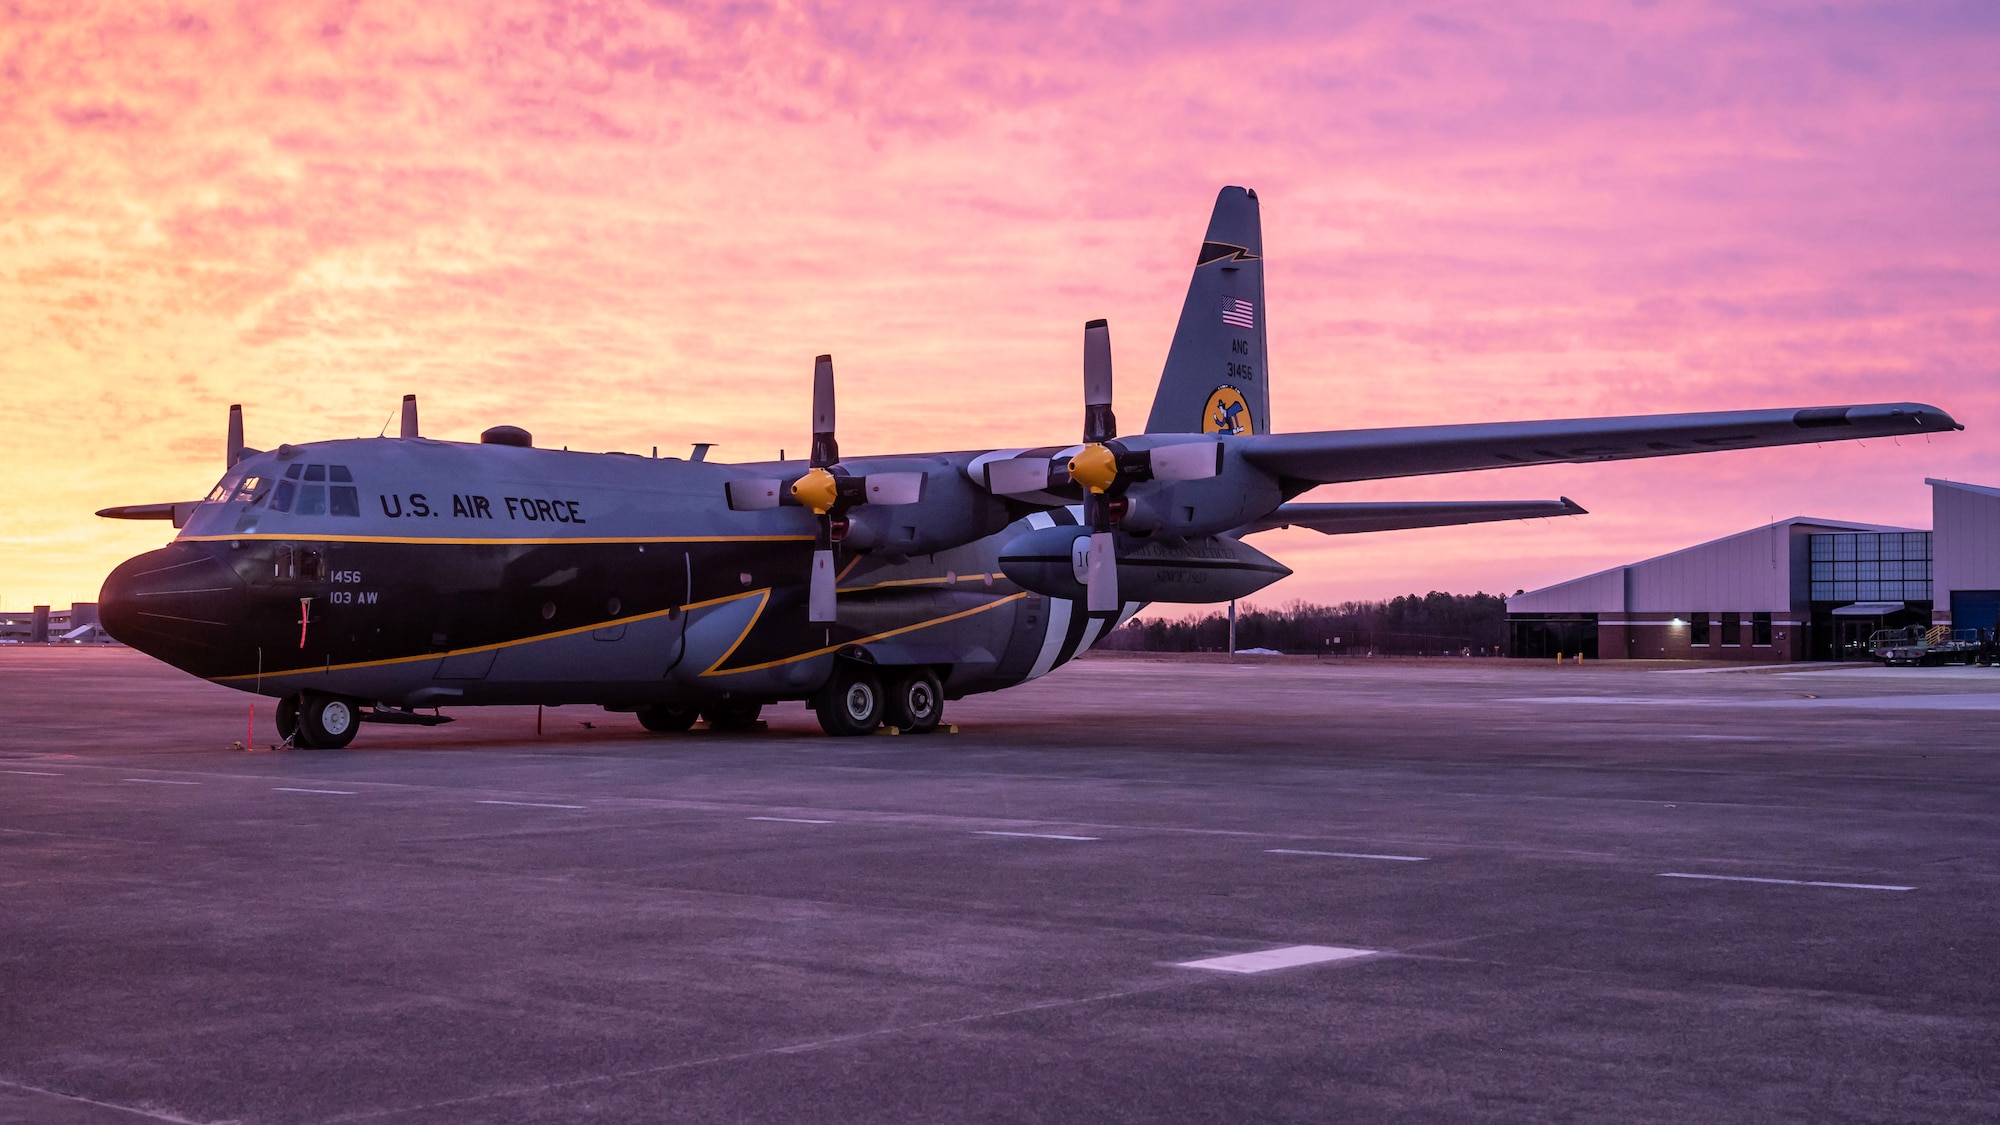 A C-130H aircraft, painted to commemorate the 100th anniversary of the 118th Airlift Squadron, Flying Yankees, sits on the flight line at sunrise, January 18, 2023 at Bradley Air National Guard Base, Conn. Members of the 103rd Maintenance Group, Connecticut Air National Guard painted the aircraft. (U.S. Air National Guard photo by Master Sgt. Tamara R. Dabney)